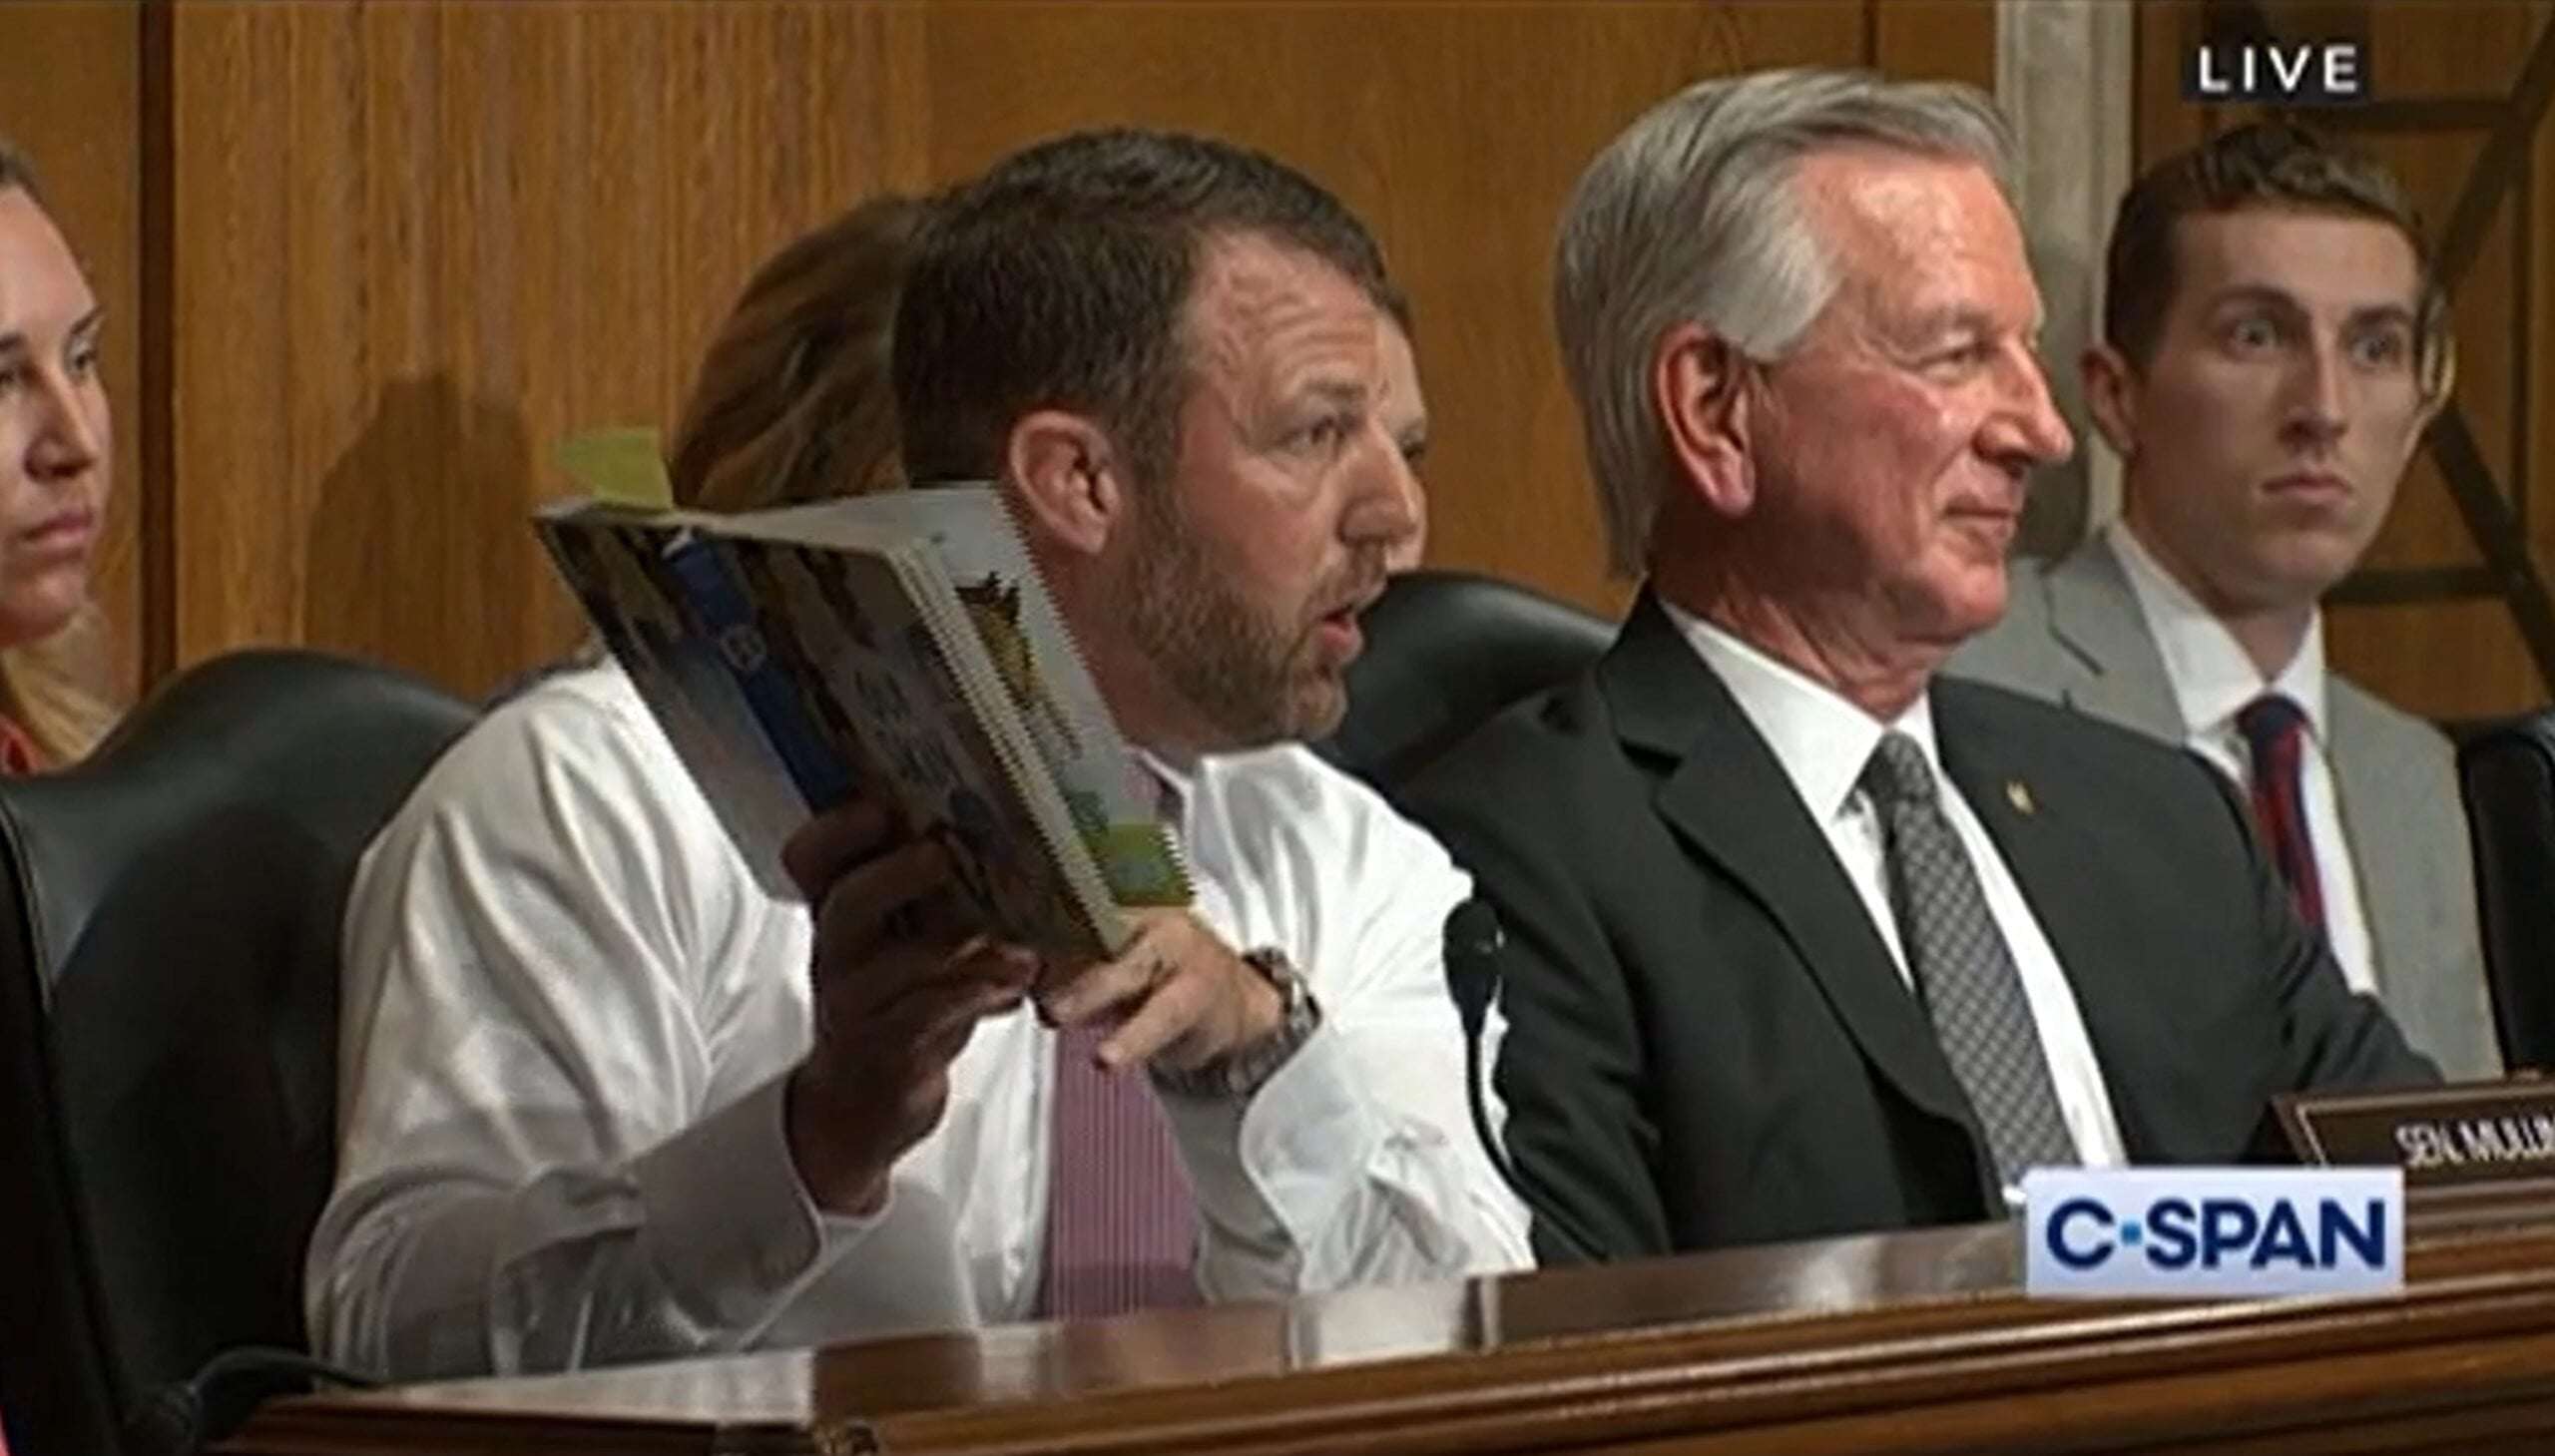 image for Markwayne Mullin Gets Laughs With Odd Comment During Hearing